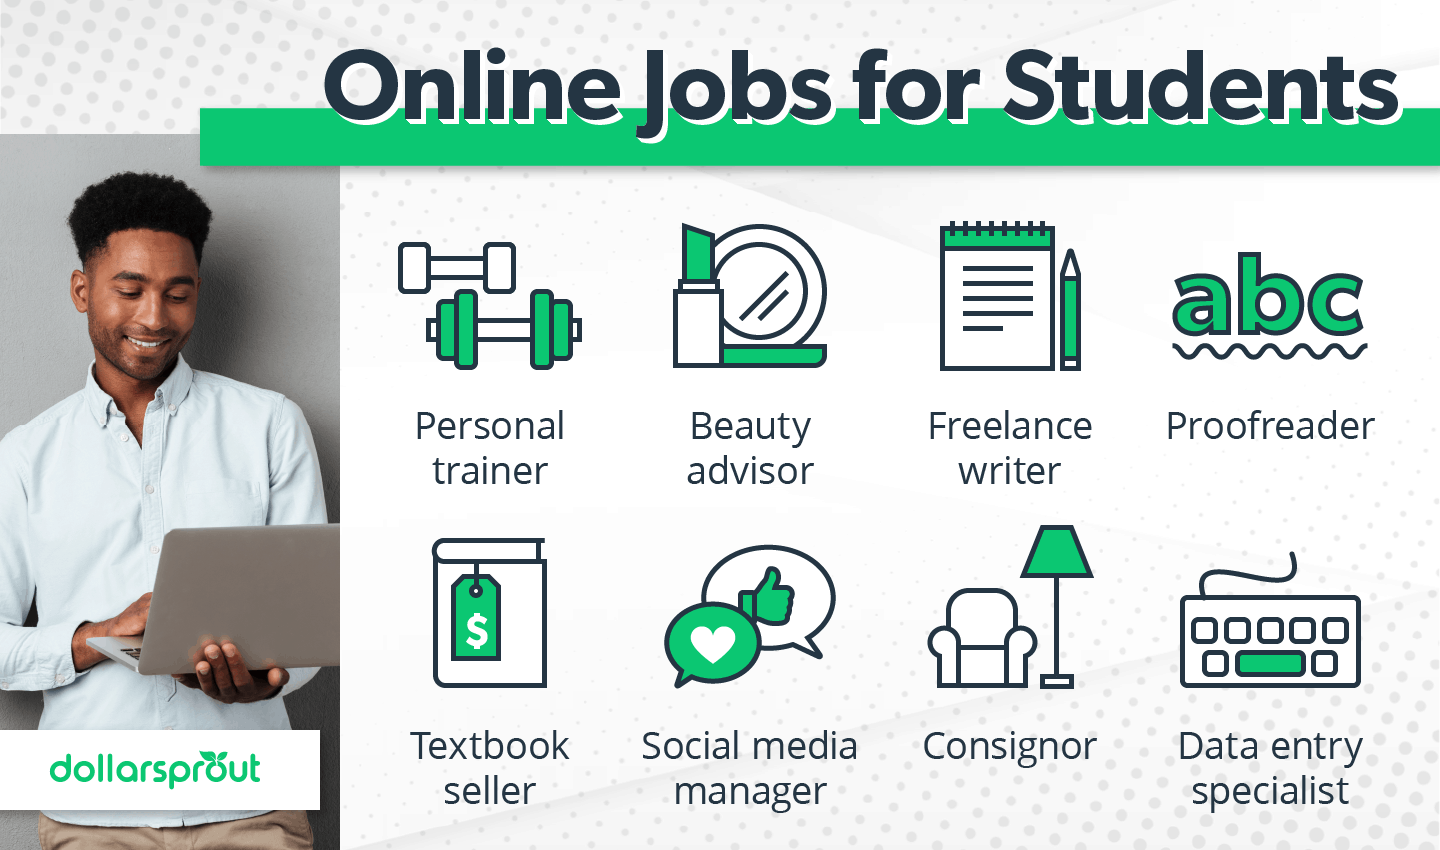 28 Legit Online Jobs That Are Easy, Flexible and Profitable